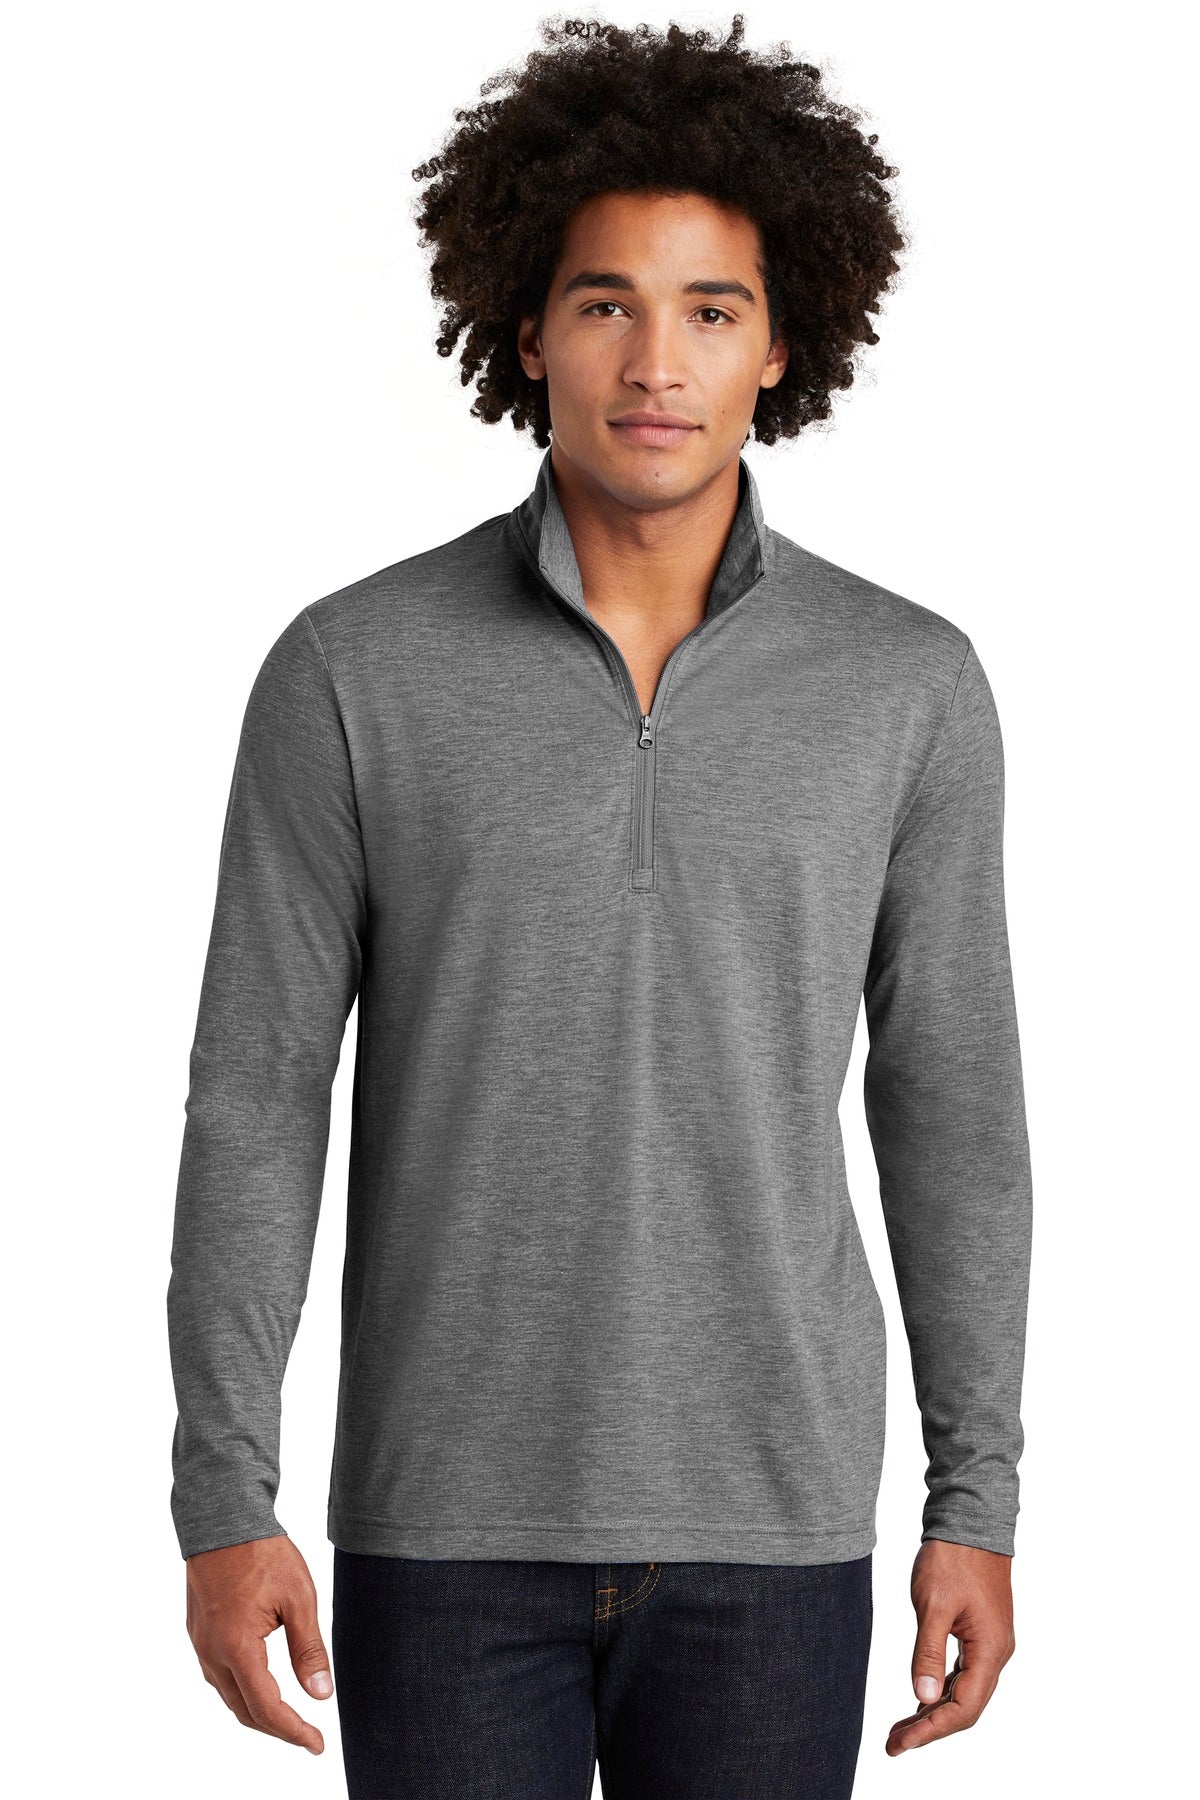 PosiCharge ® Tri-Blend Wicking 1/4-Zip Pullover. ST407